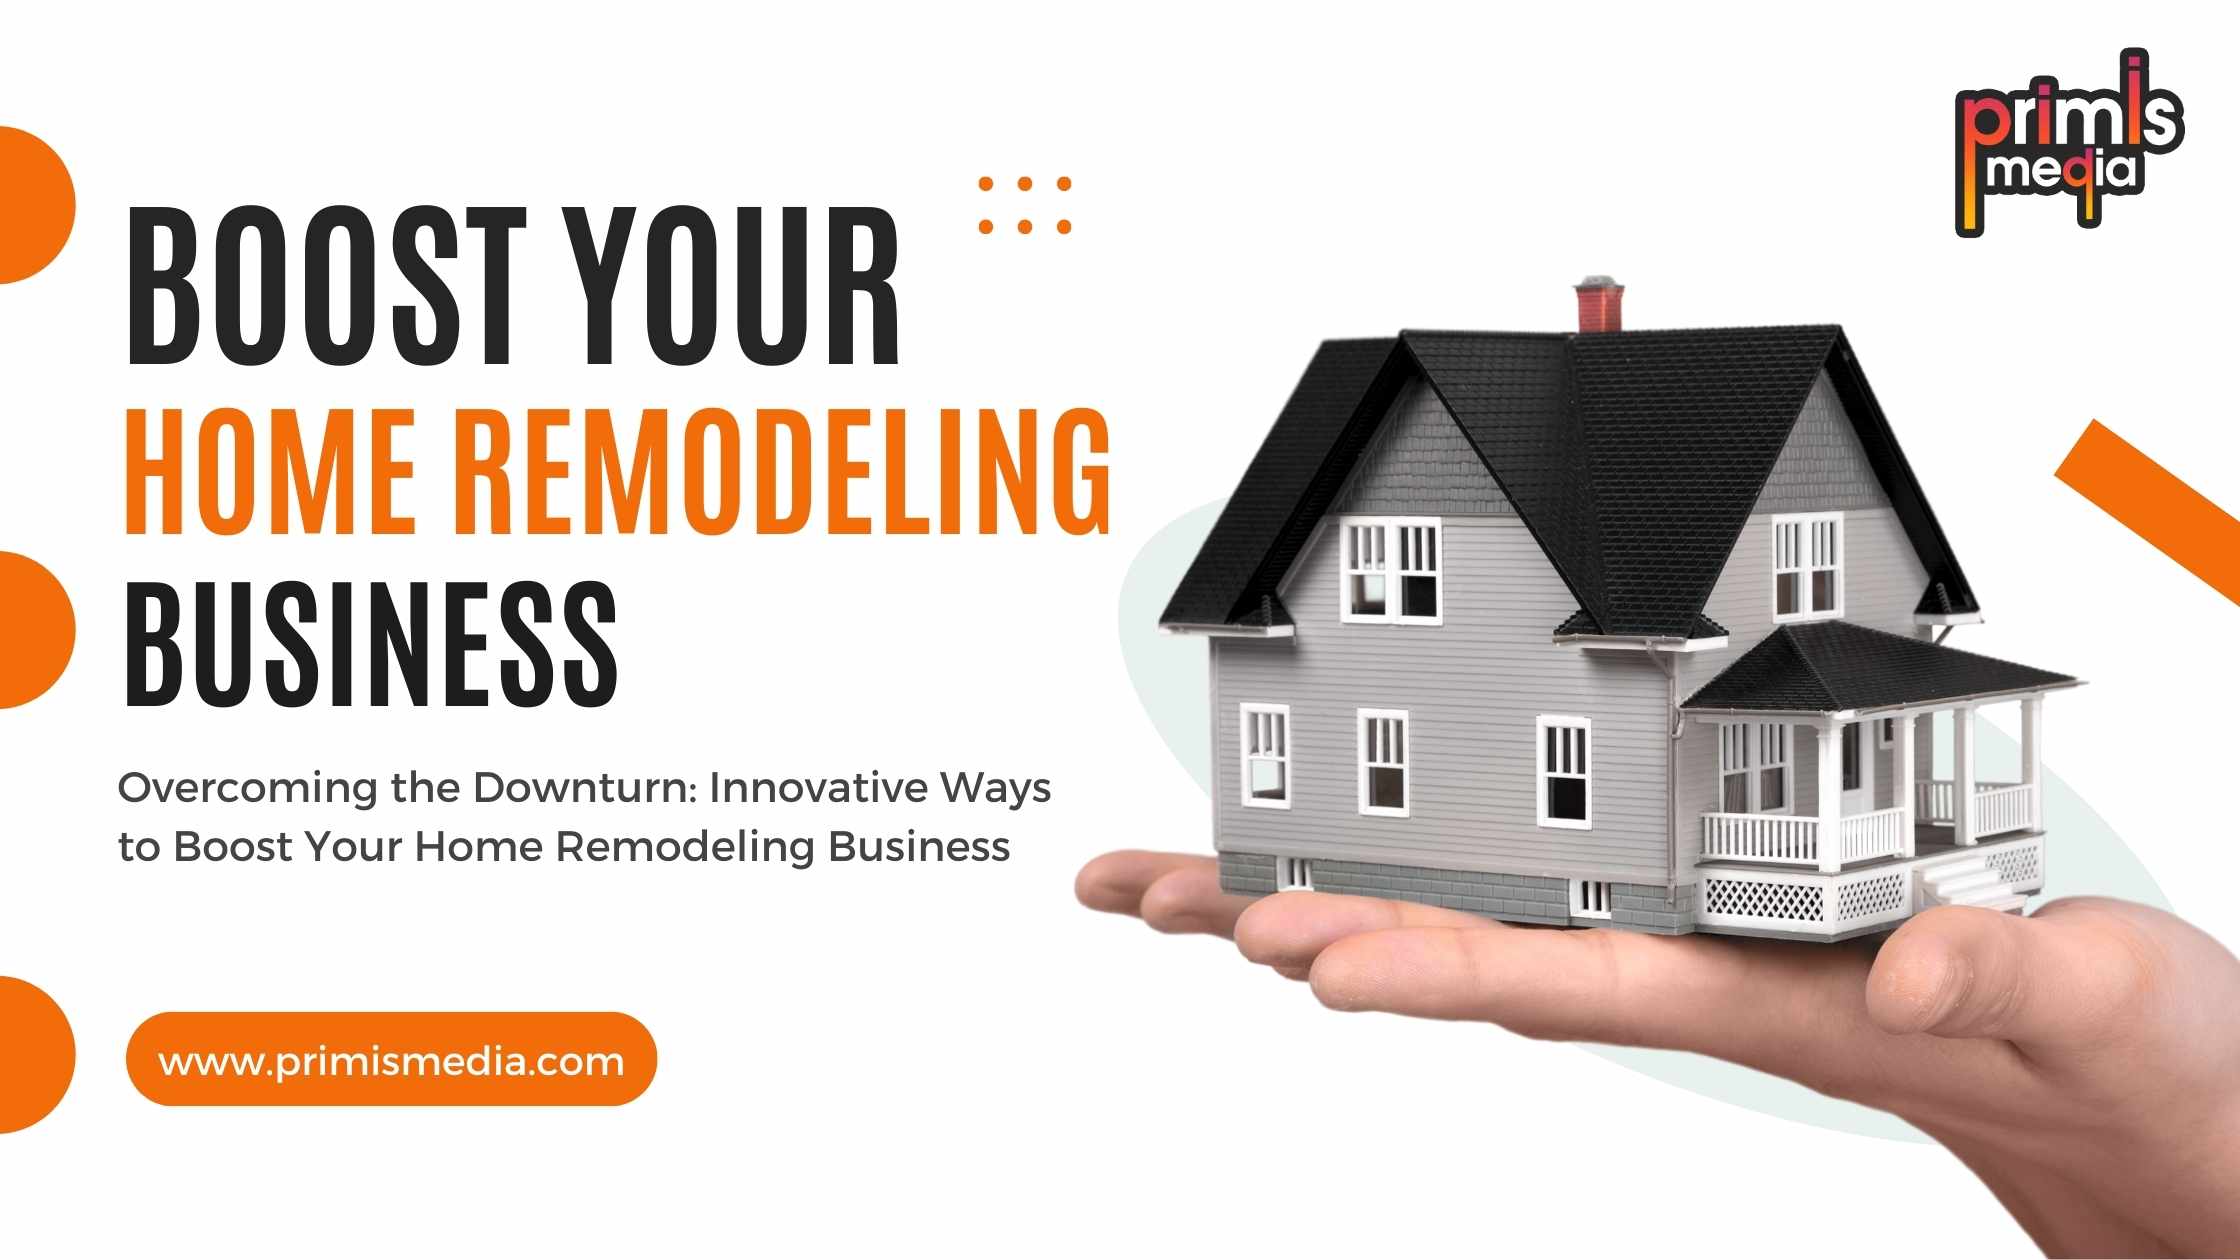 Overcoming the Downturn: Innovative Ways to Boost Your Home Remodeling Business